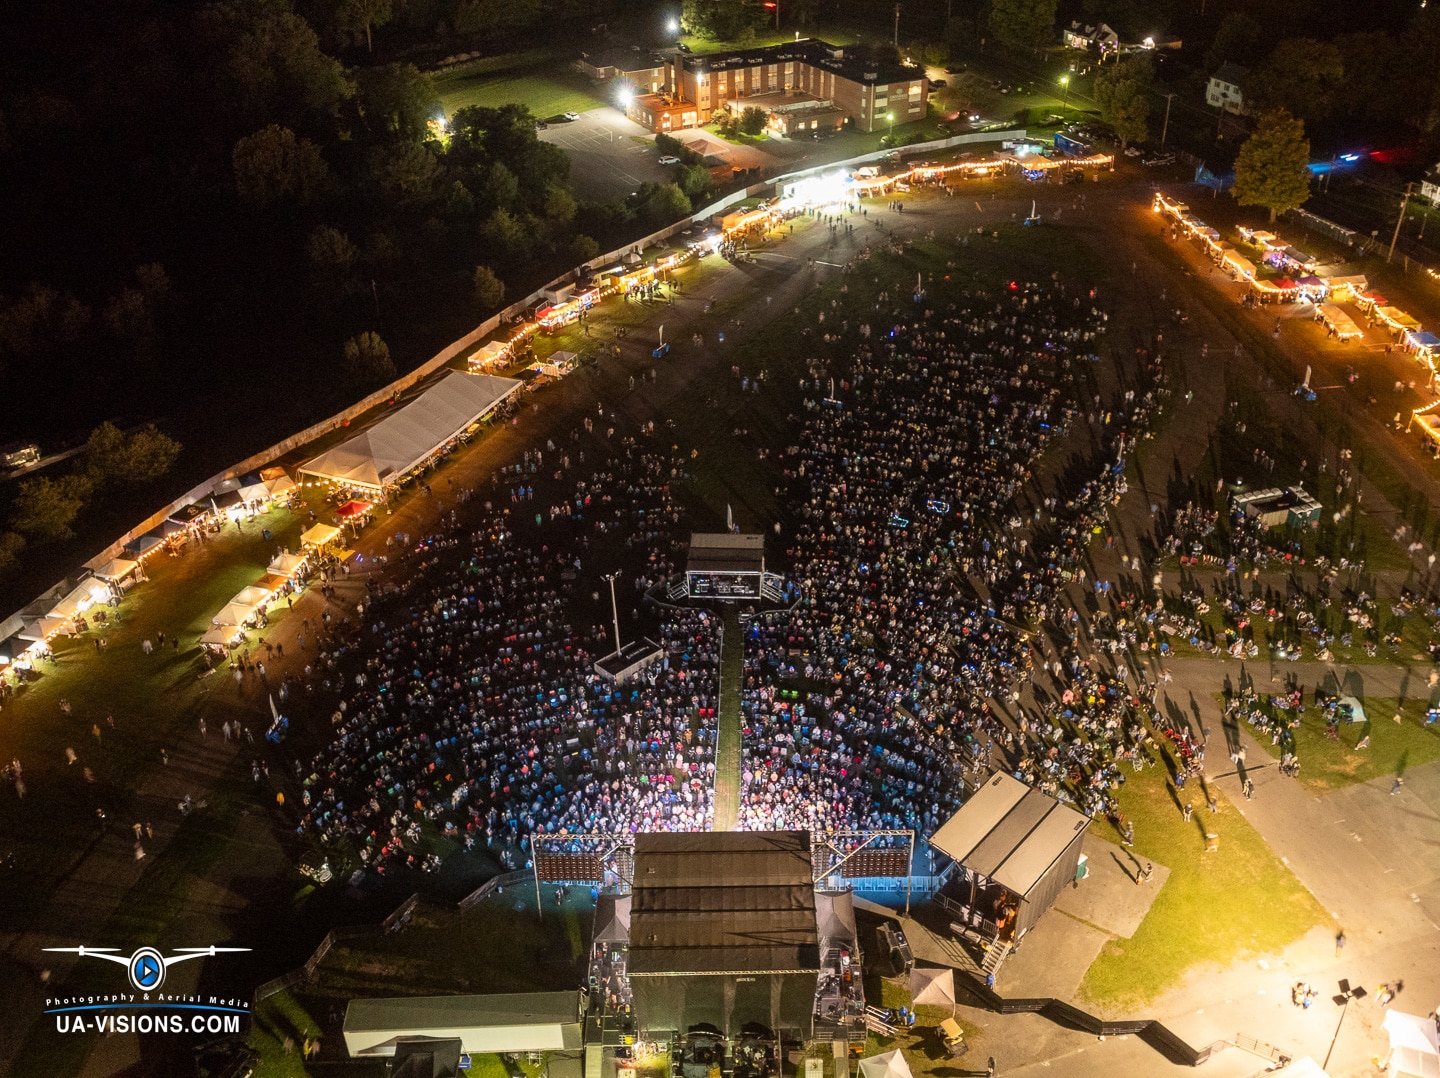 Aerial night view of a large outdoor Healing Appalachia event with crowds and festival lights.